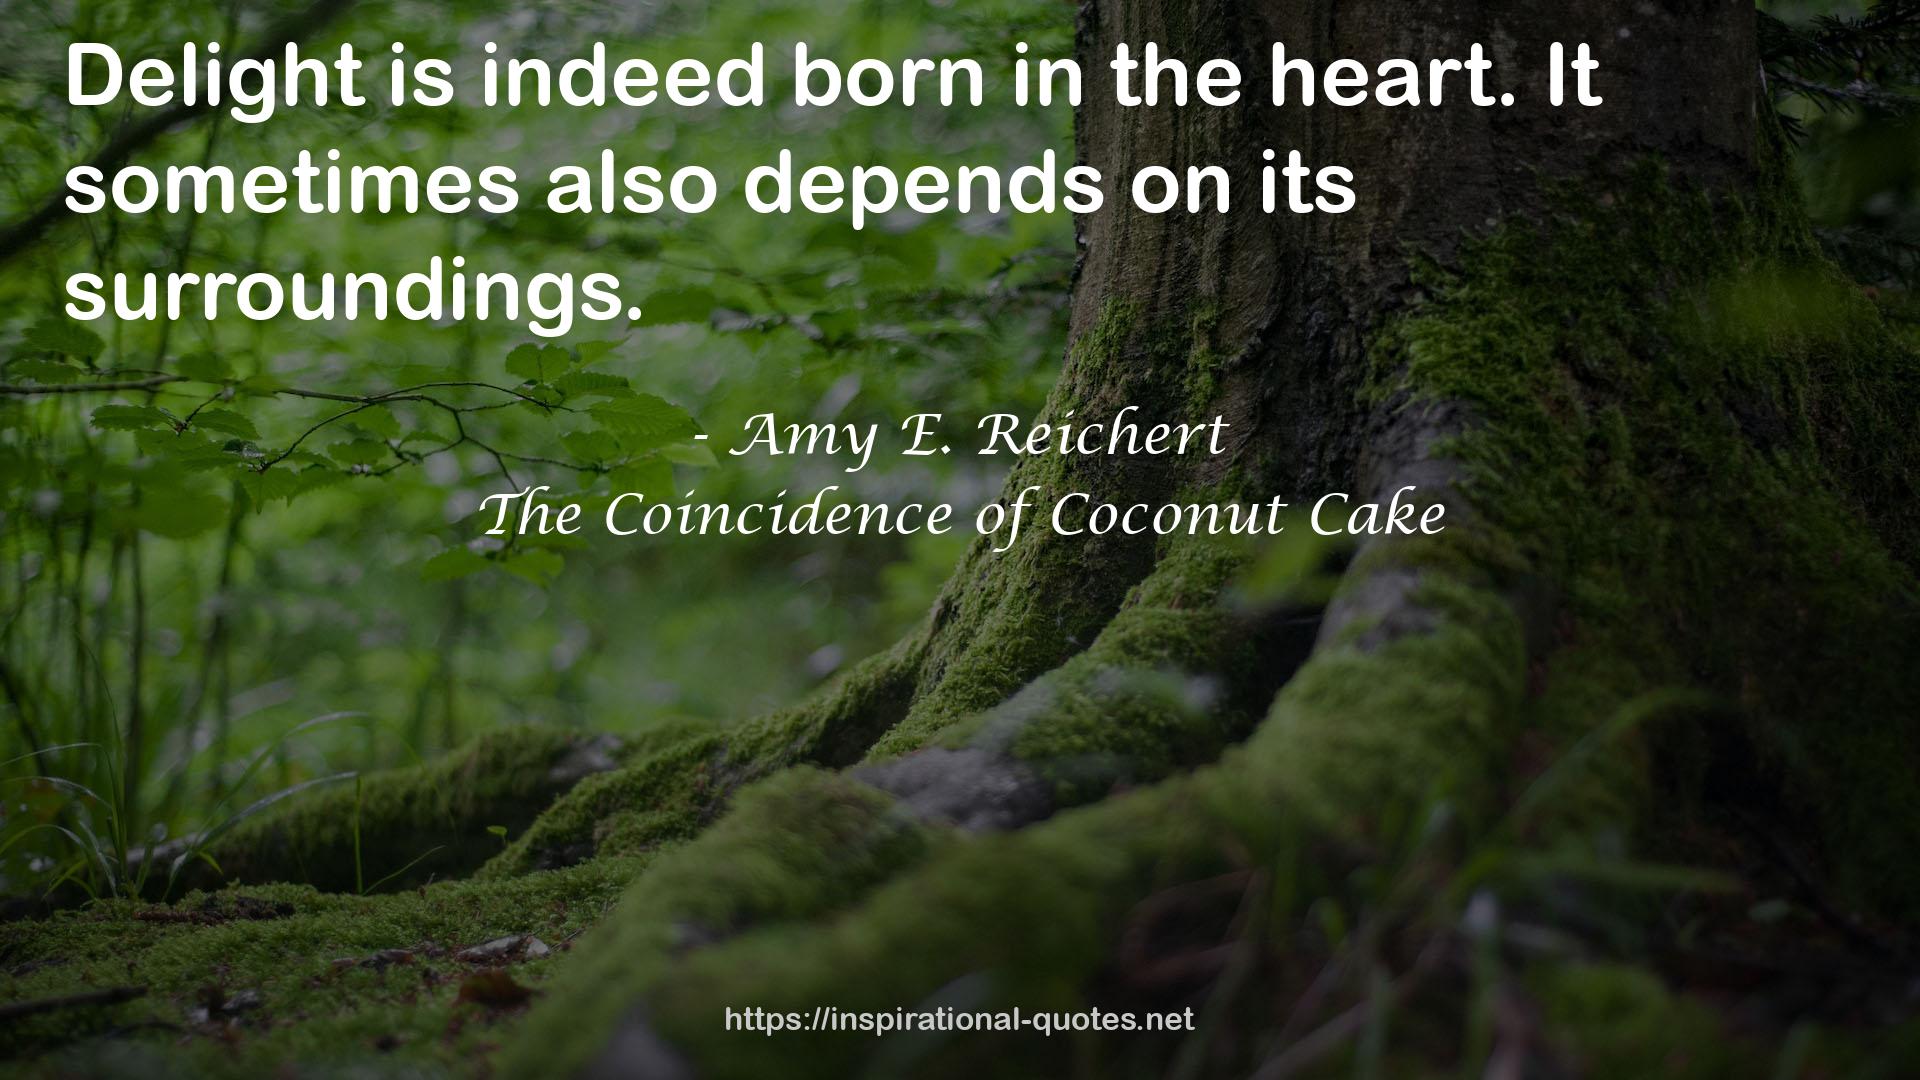 The Coincidence of Coconut Cake QUOTES